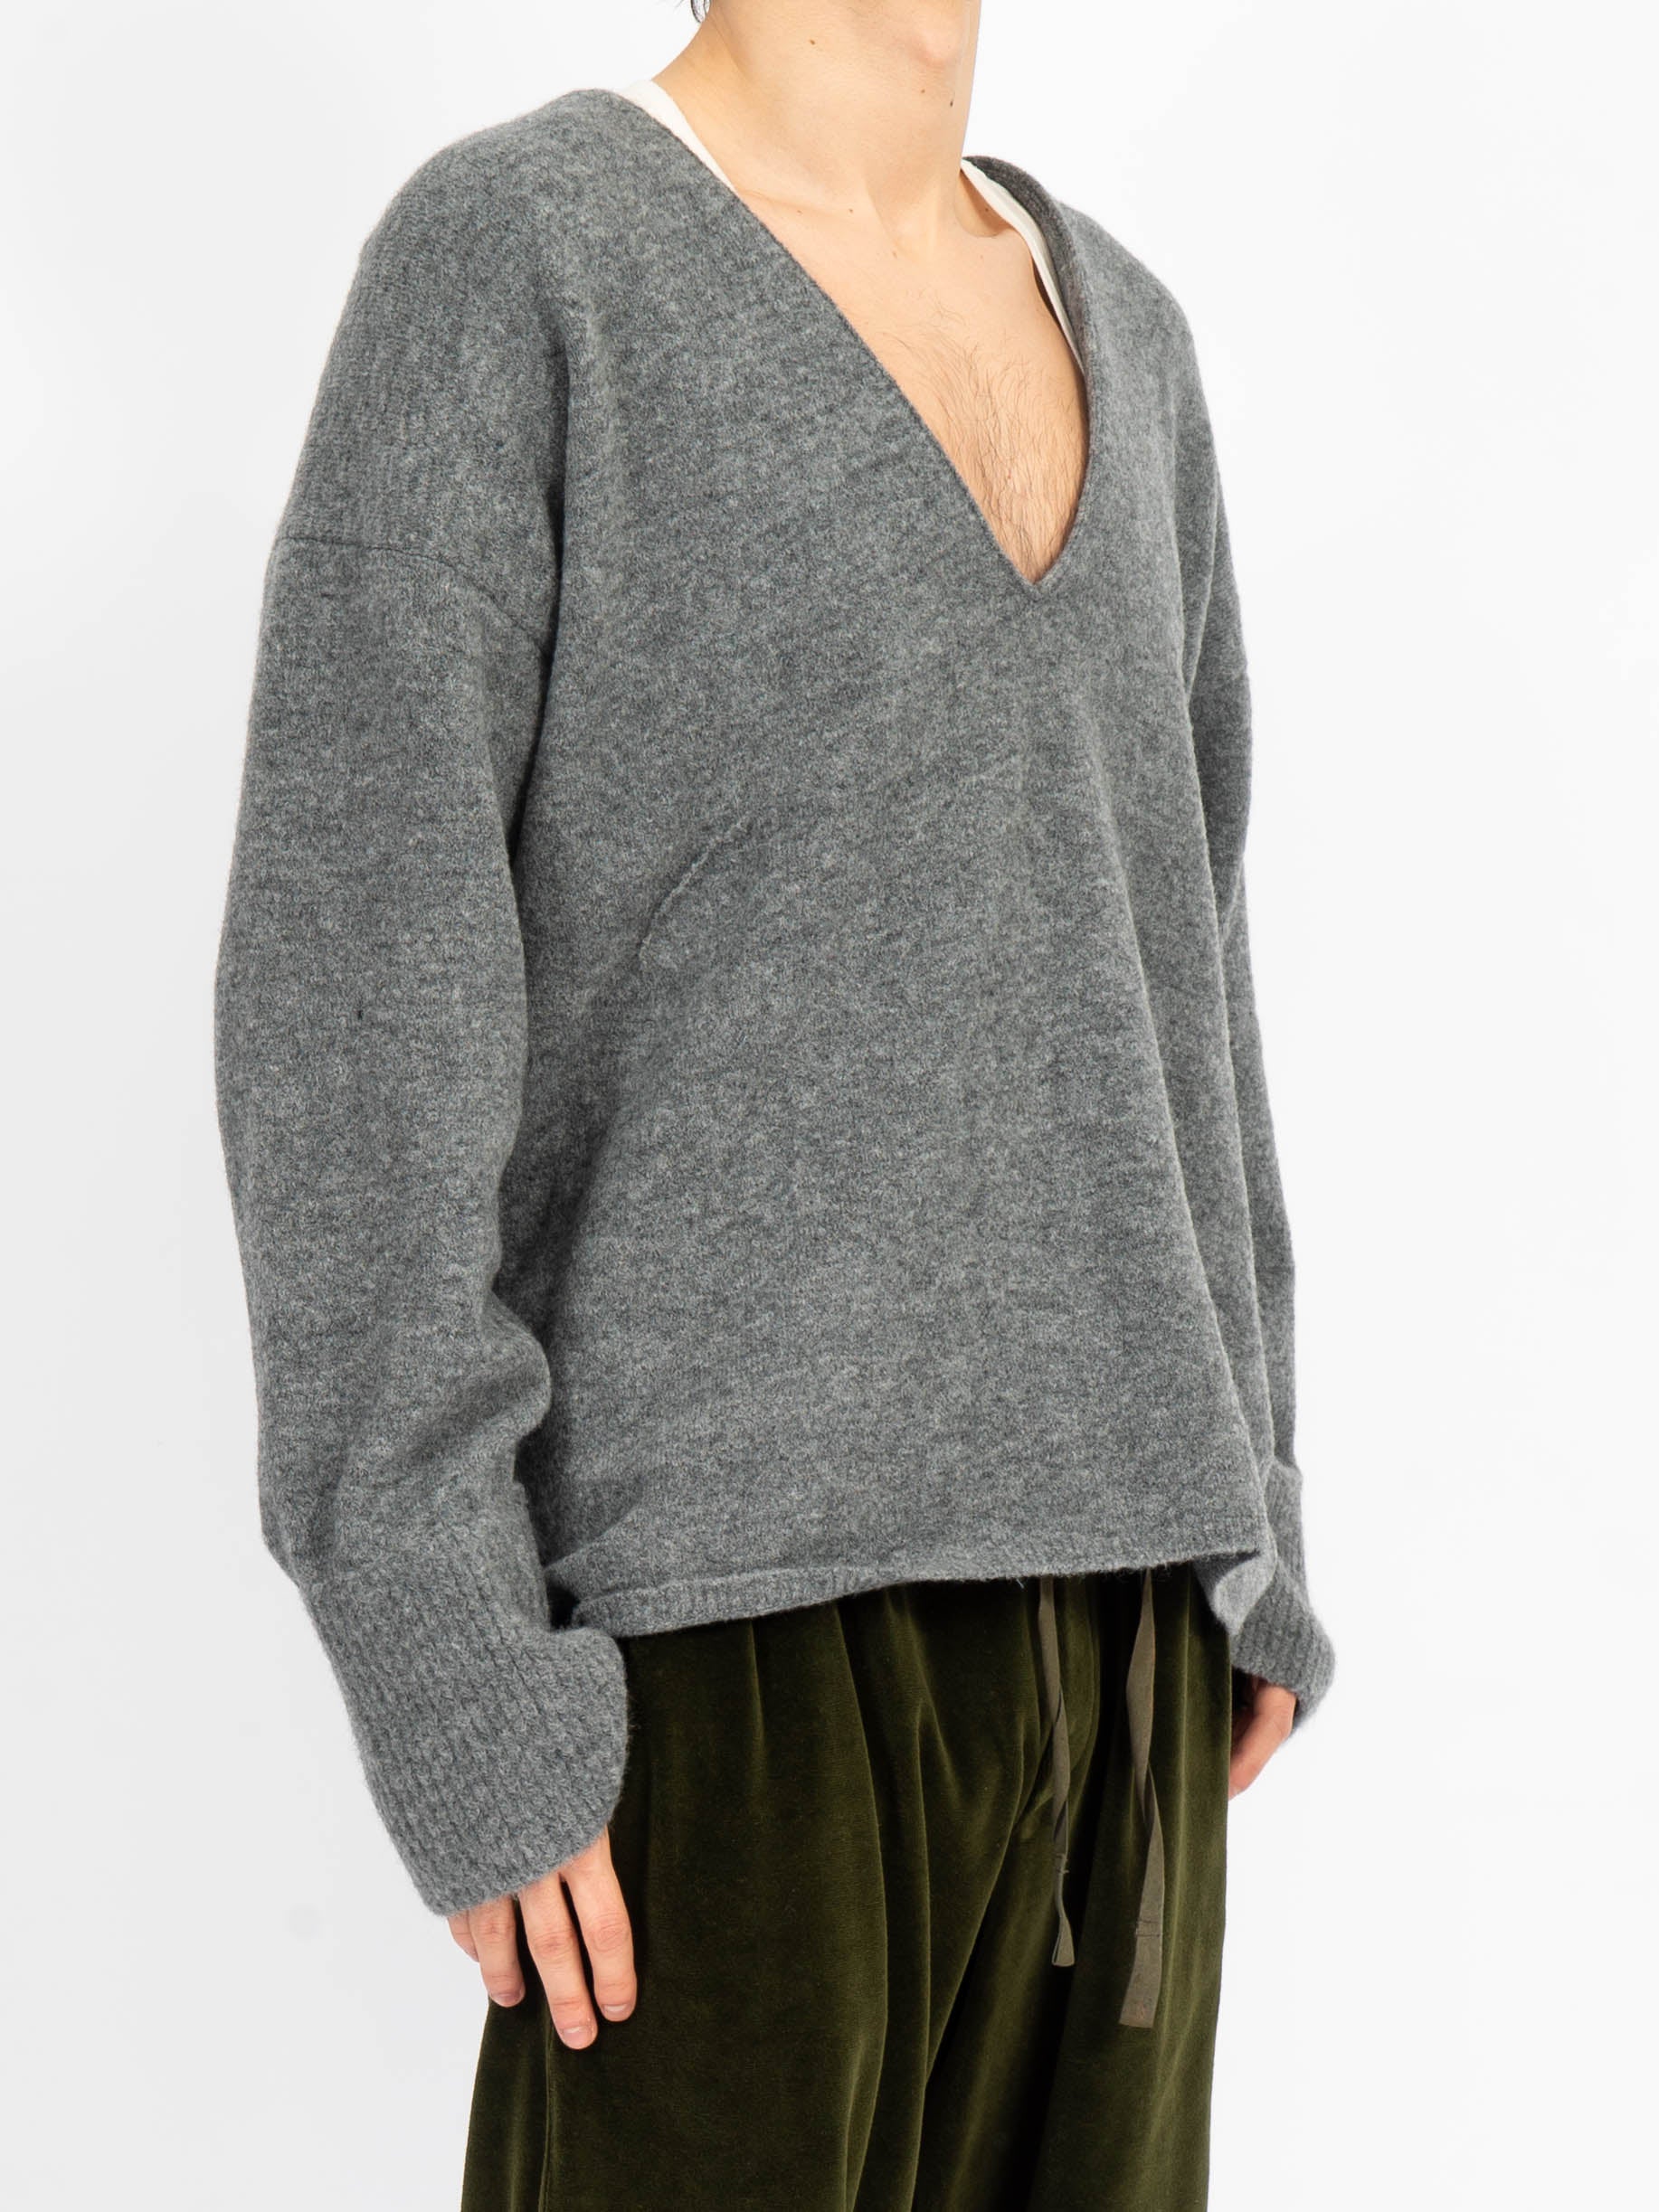 SS16 Relaxed V-Neck Knit Grey